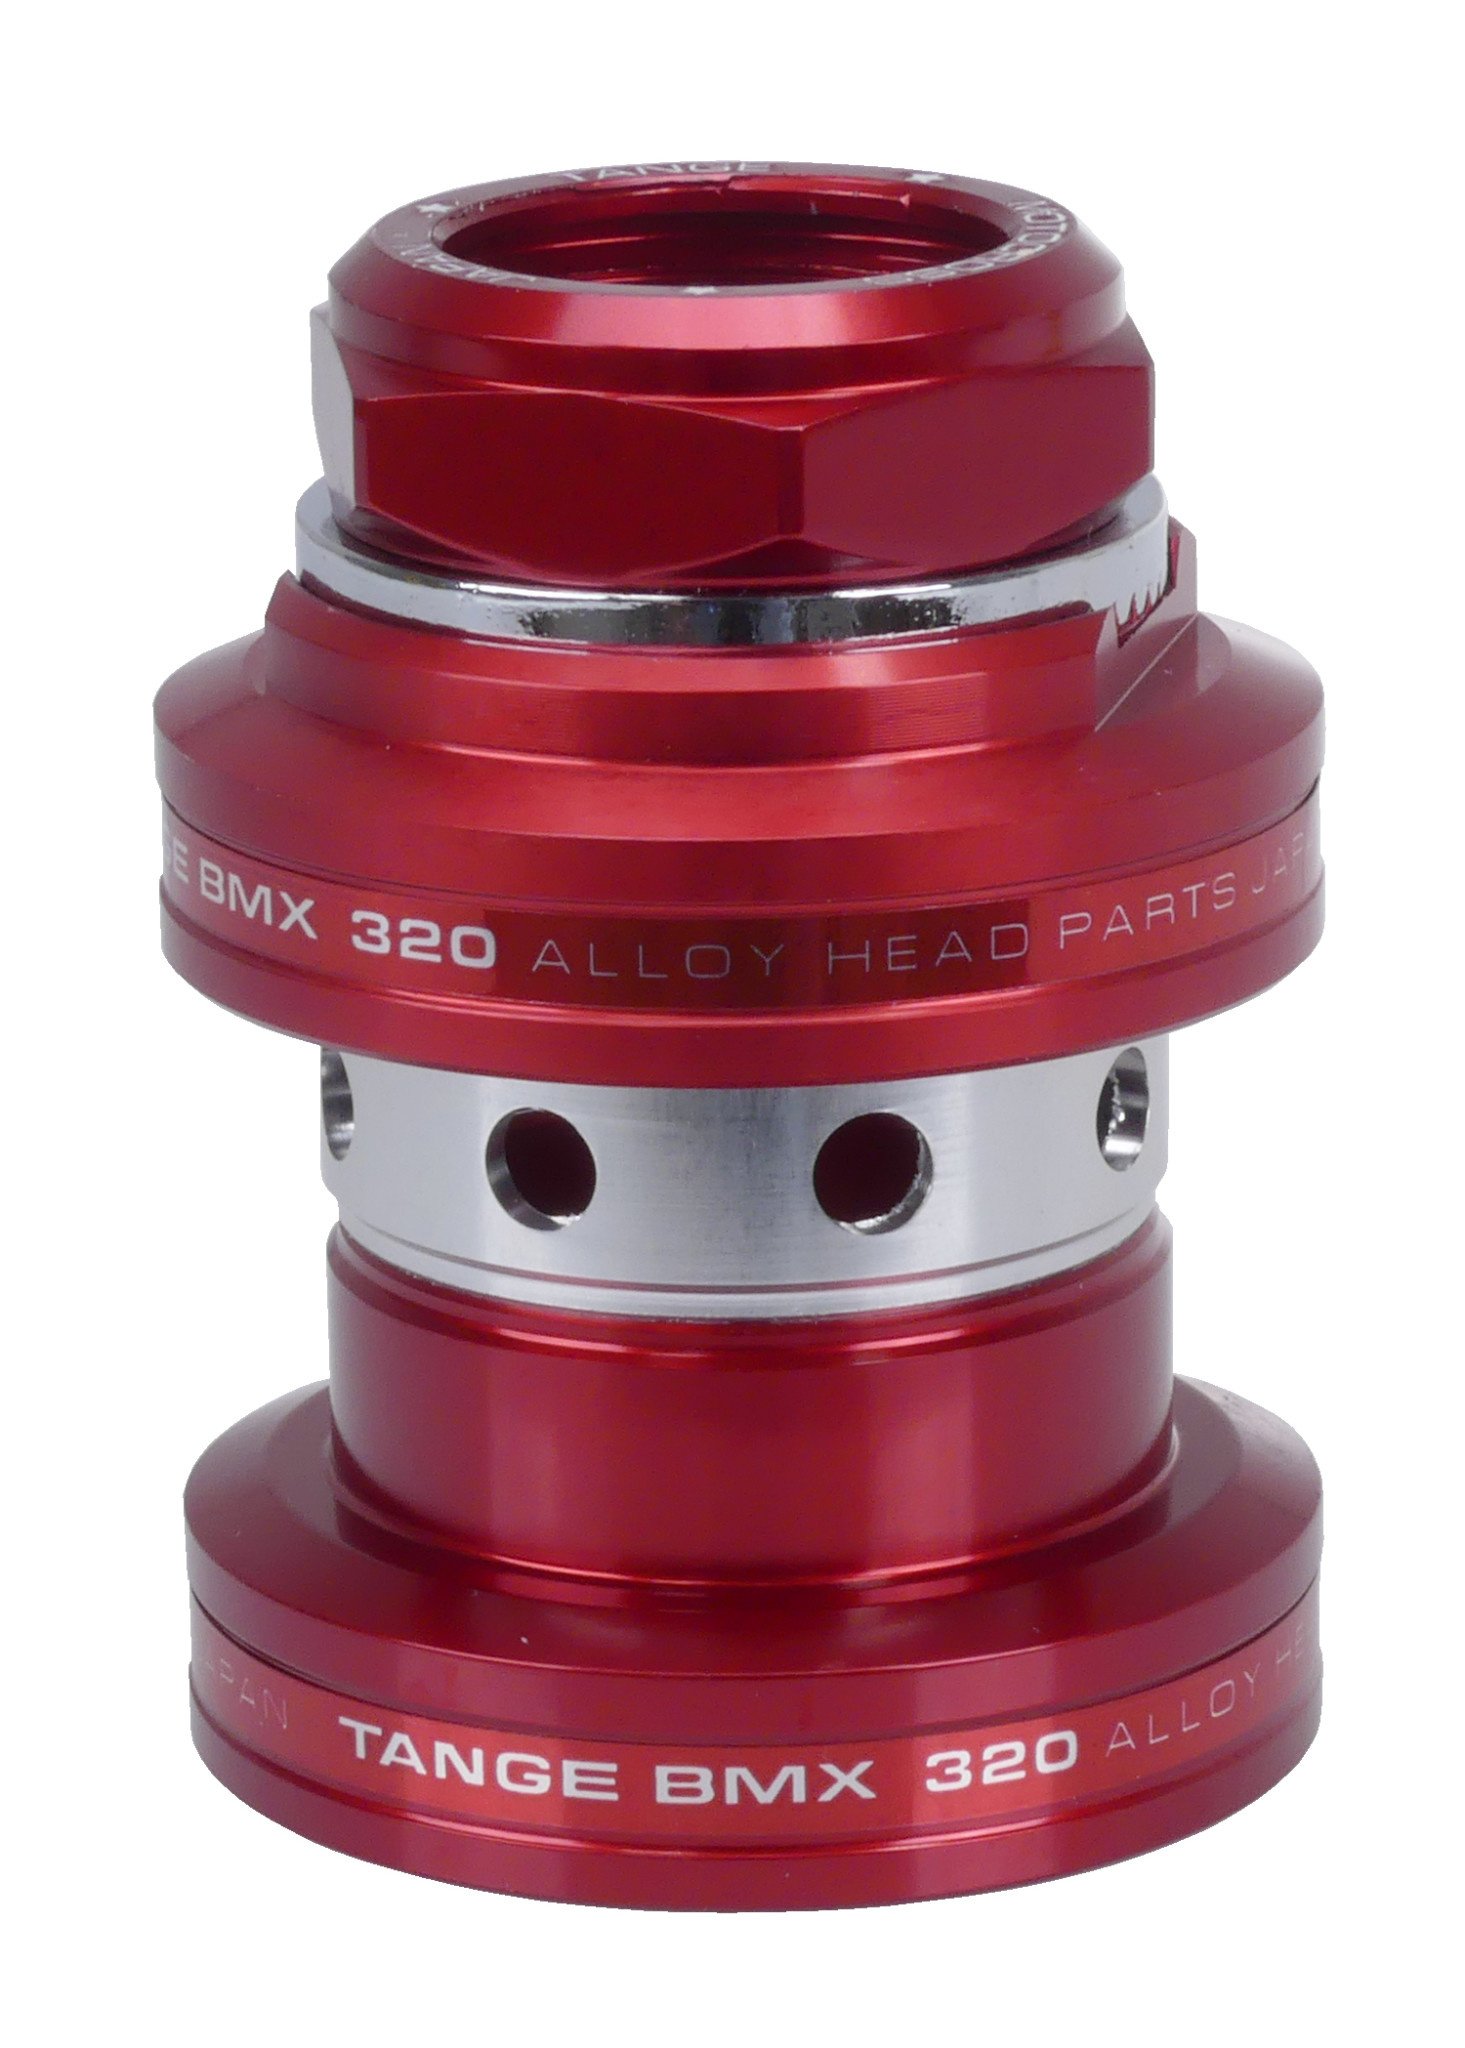 Tange MX320 sealed bearing aluminum alloy old school BMX bicycle headset -  1 threaded w/ 32.7mm cups - RED - Porkchop BMX